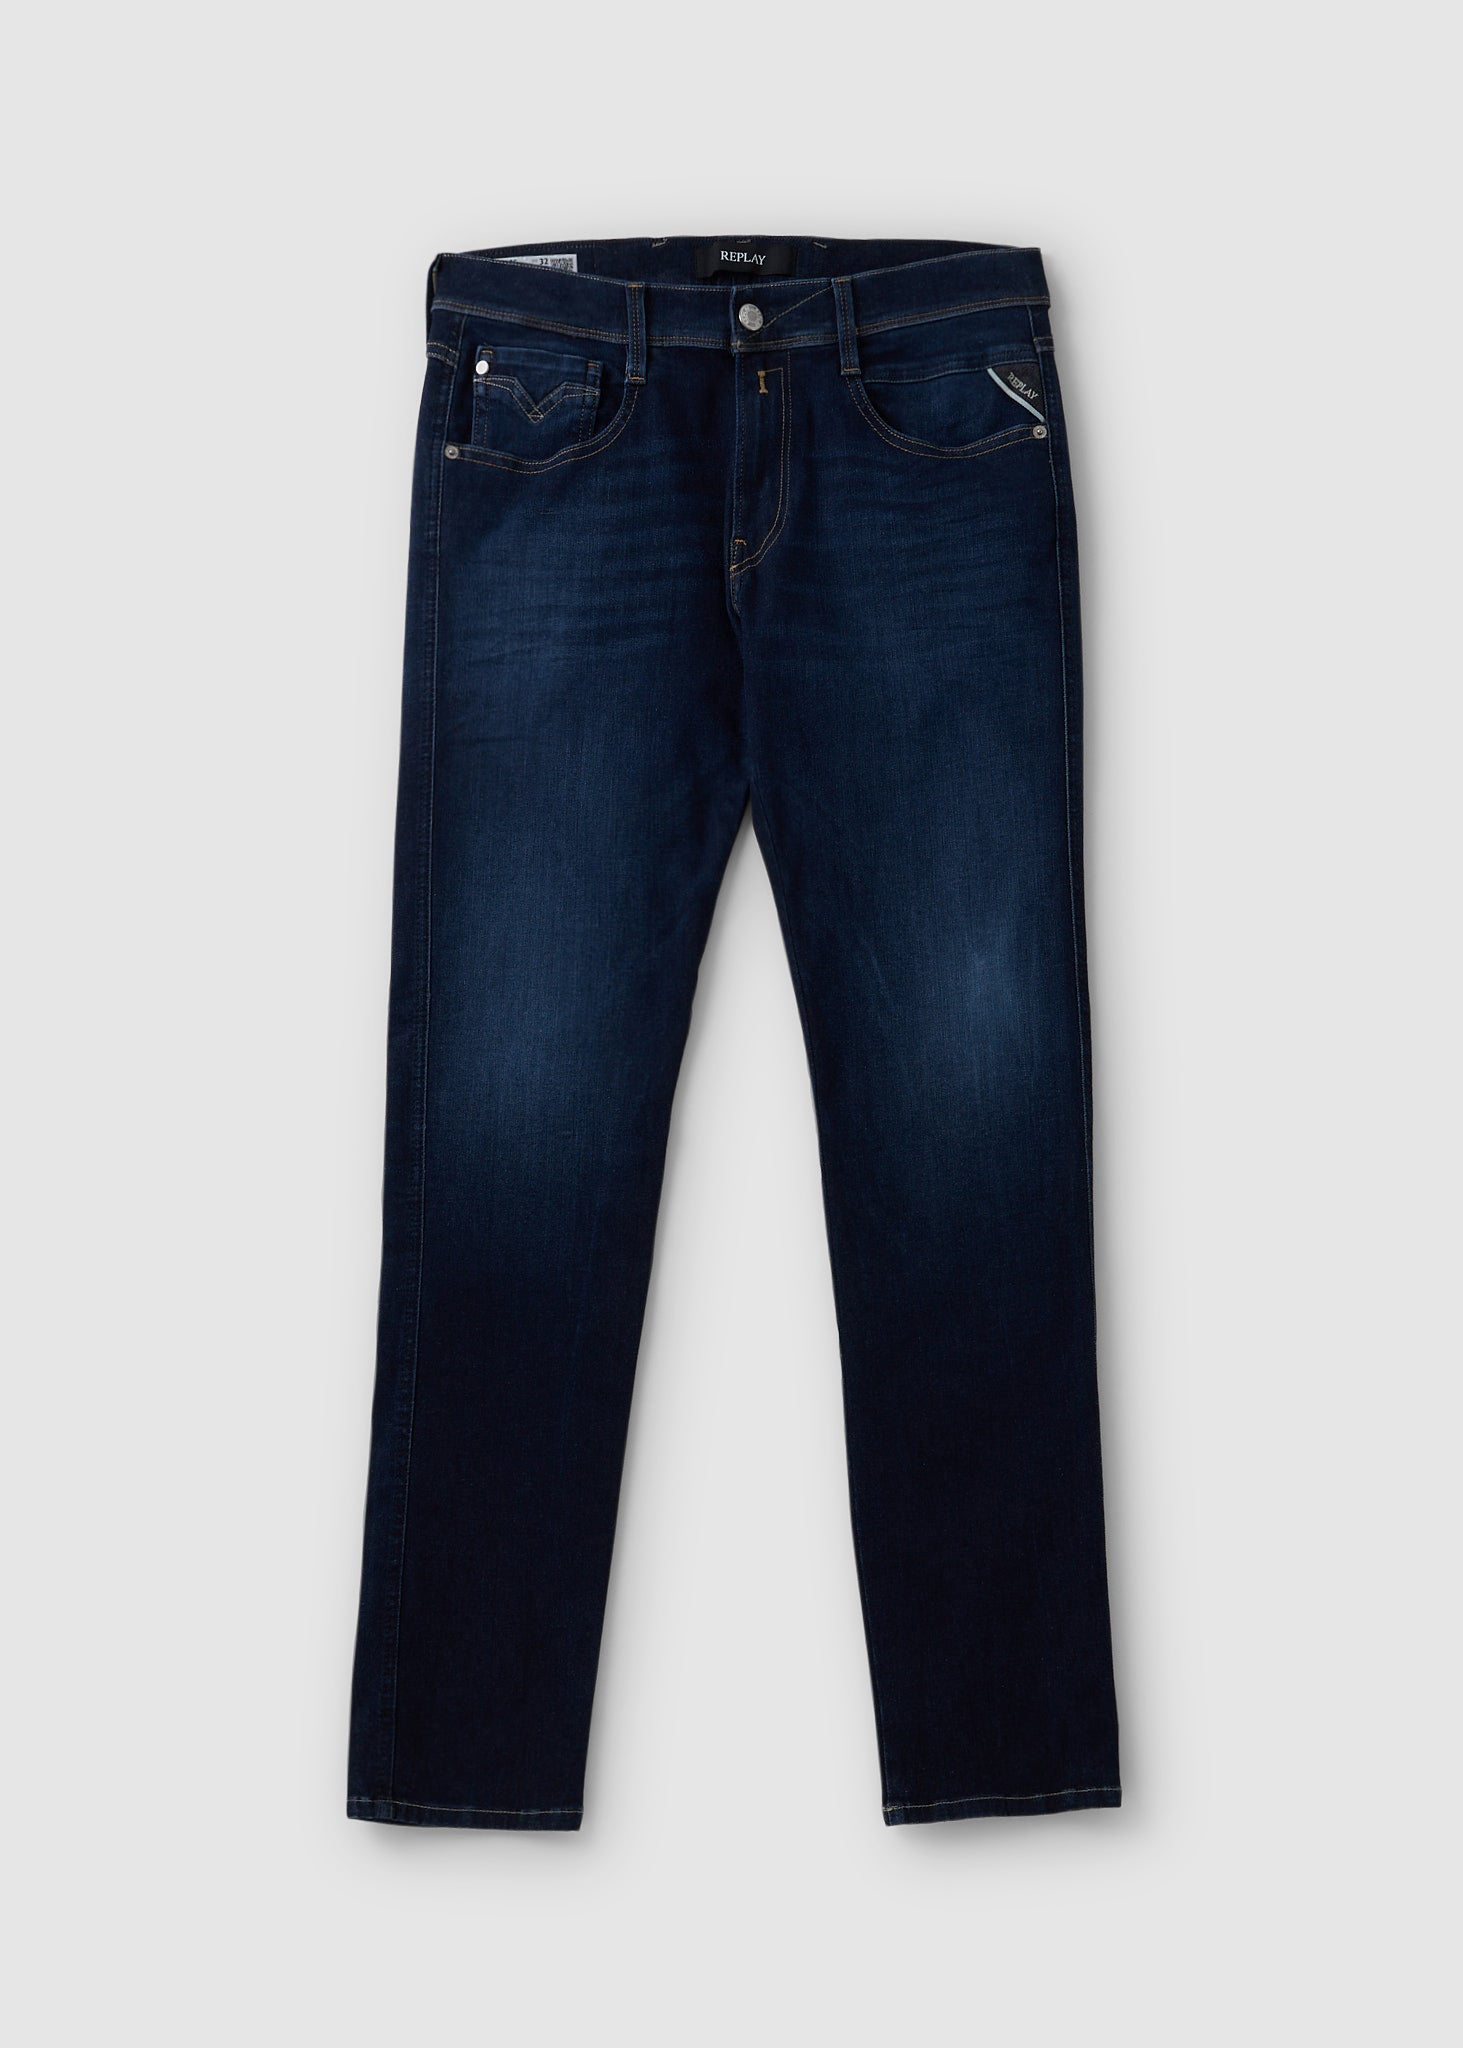 Replay Mens Anbass Jeans In Dark Blue - Navy